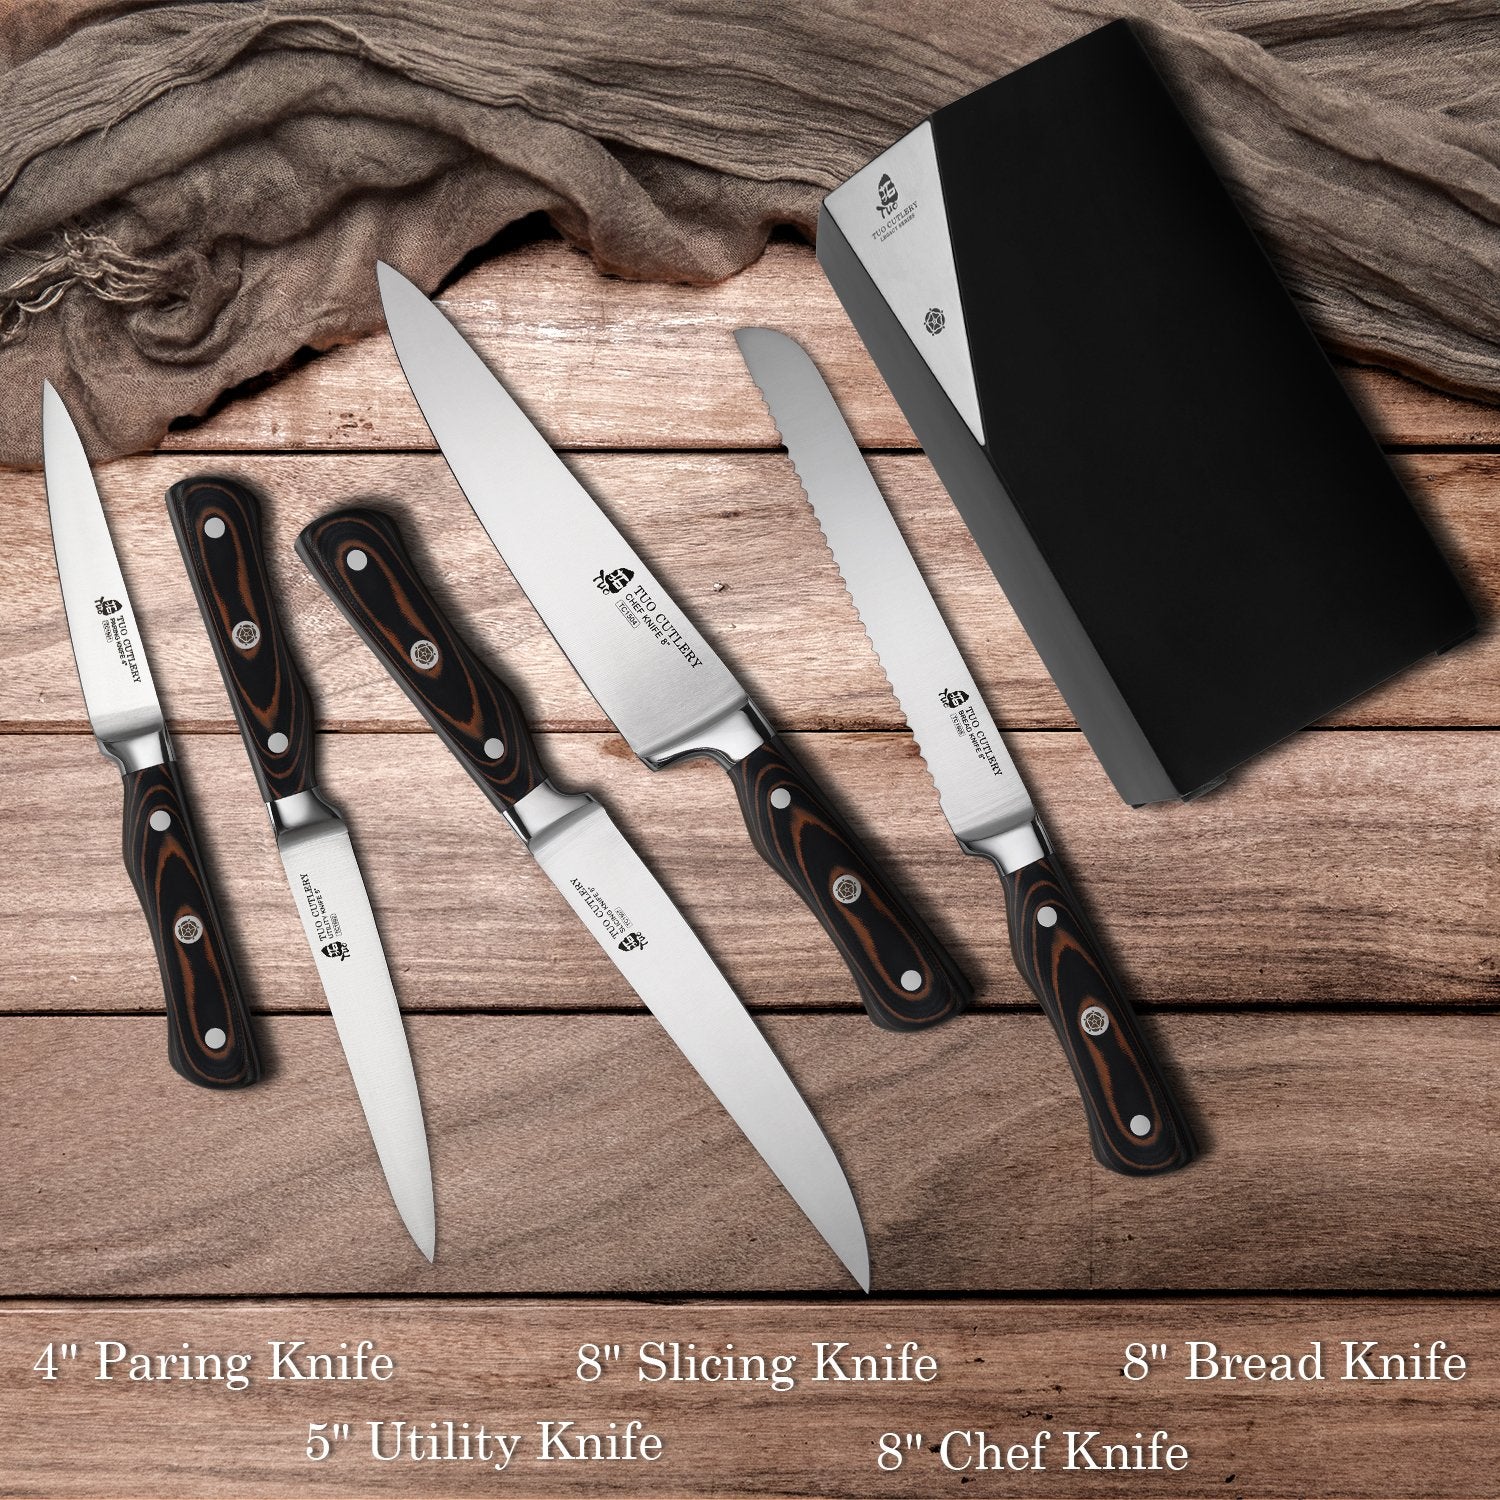 TUO LEGACY SERIES CHEF KNIFE 8